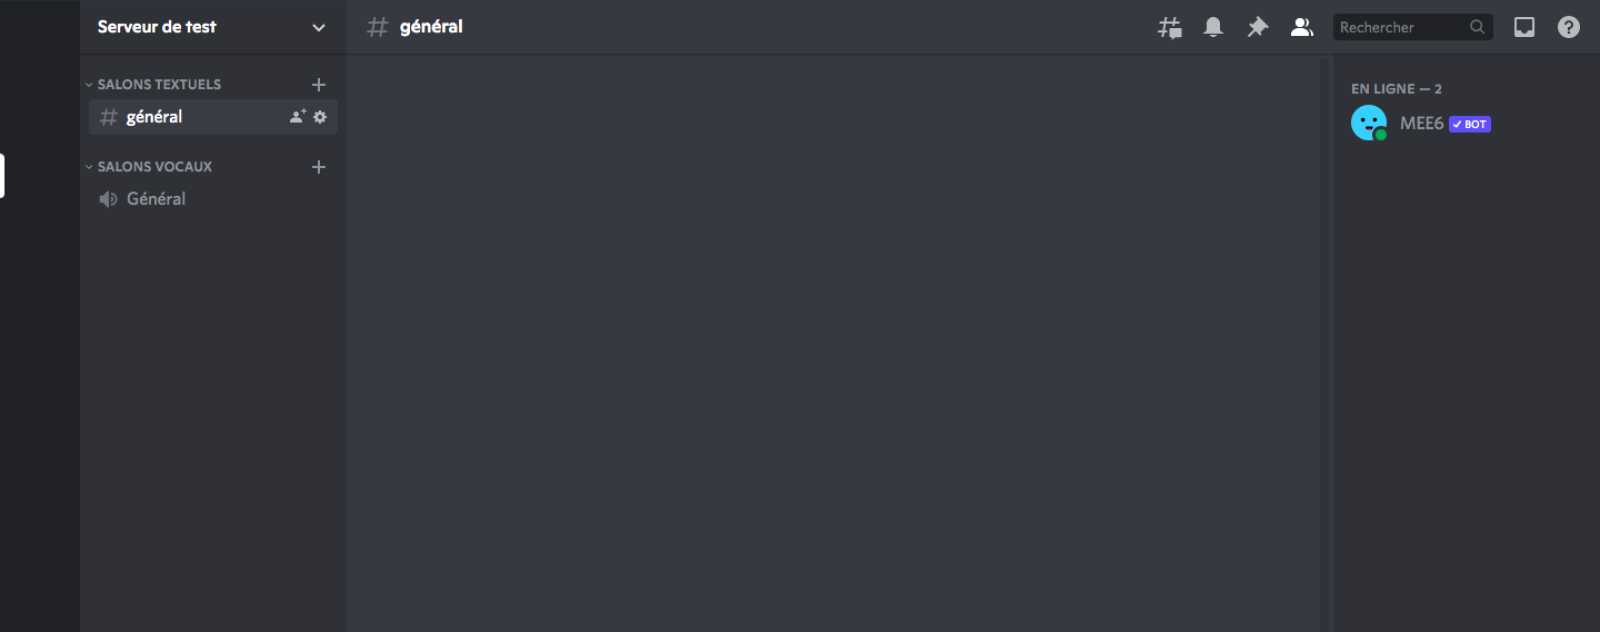 MEE6 apparaît sur Discord